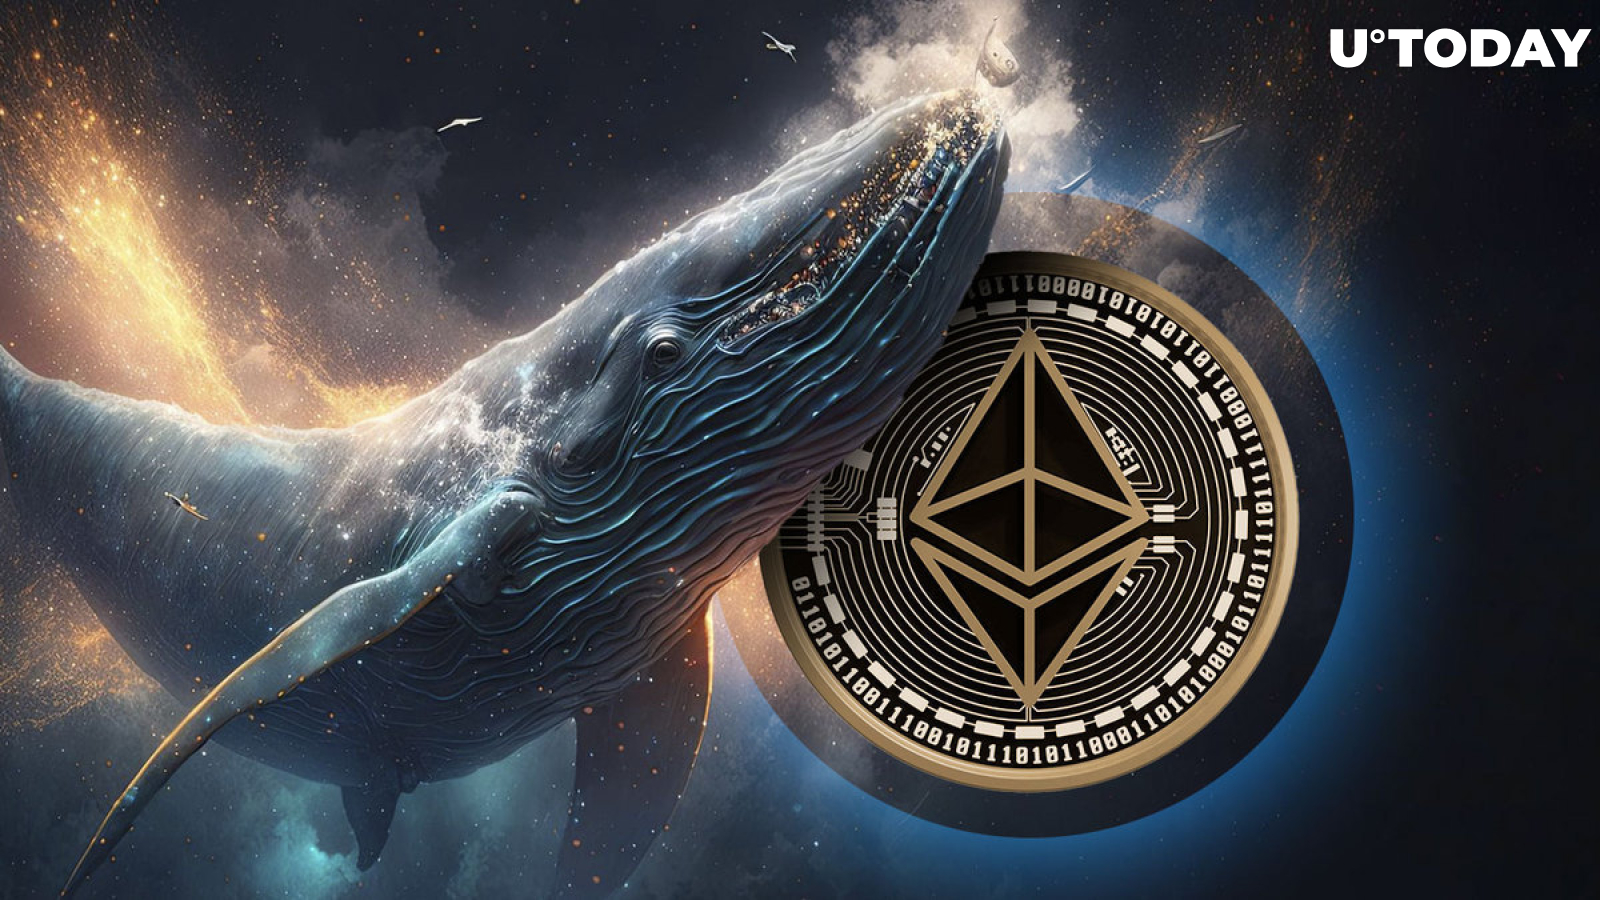 Mysterious Whale Pulls 6,030 Ethereum (ETH) From Exchange as Price Eyes $3,000